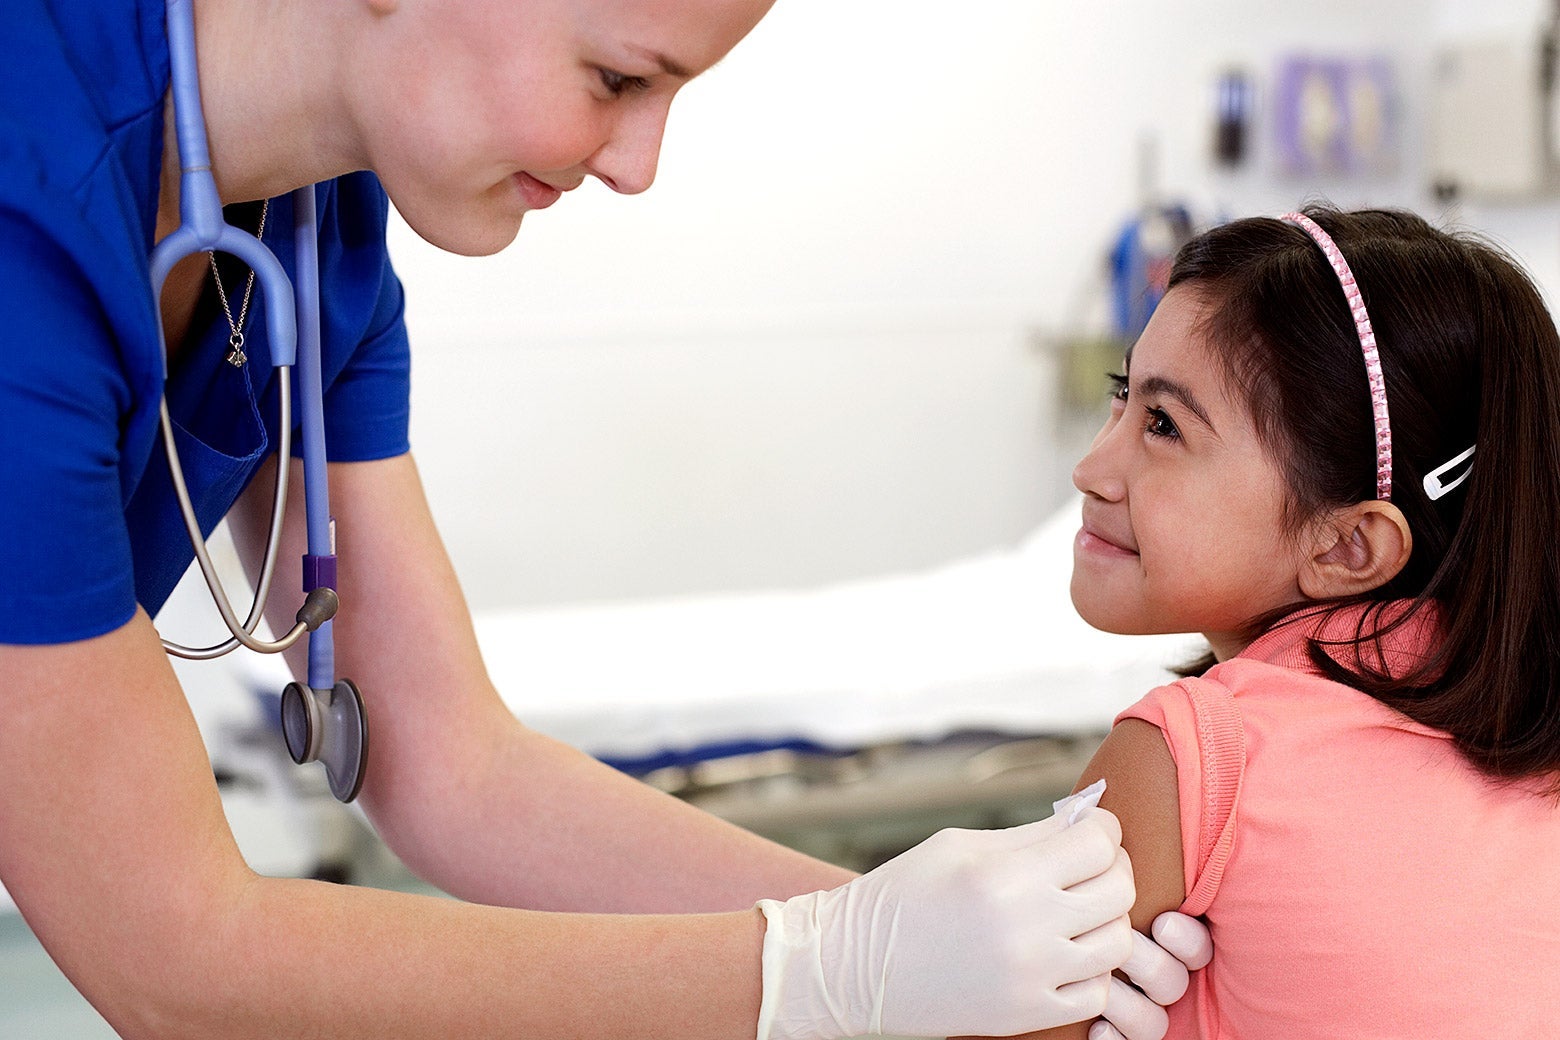 A health care provider puts a bandage on a child’s arm where she might have just gotten a shot.